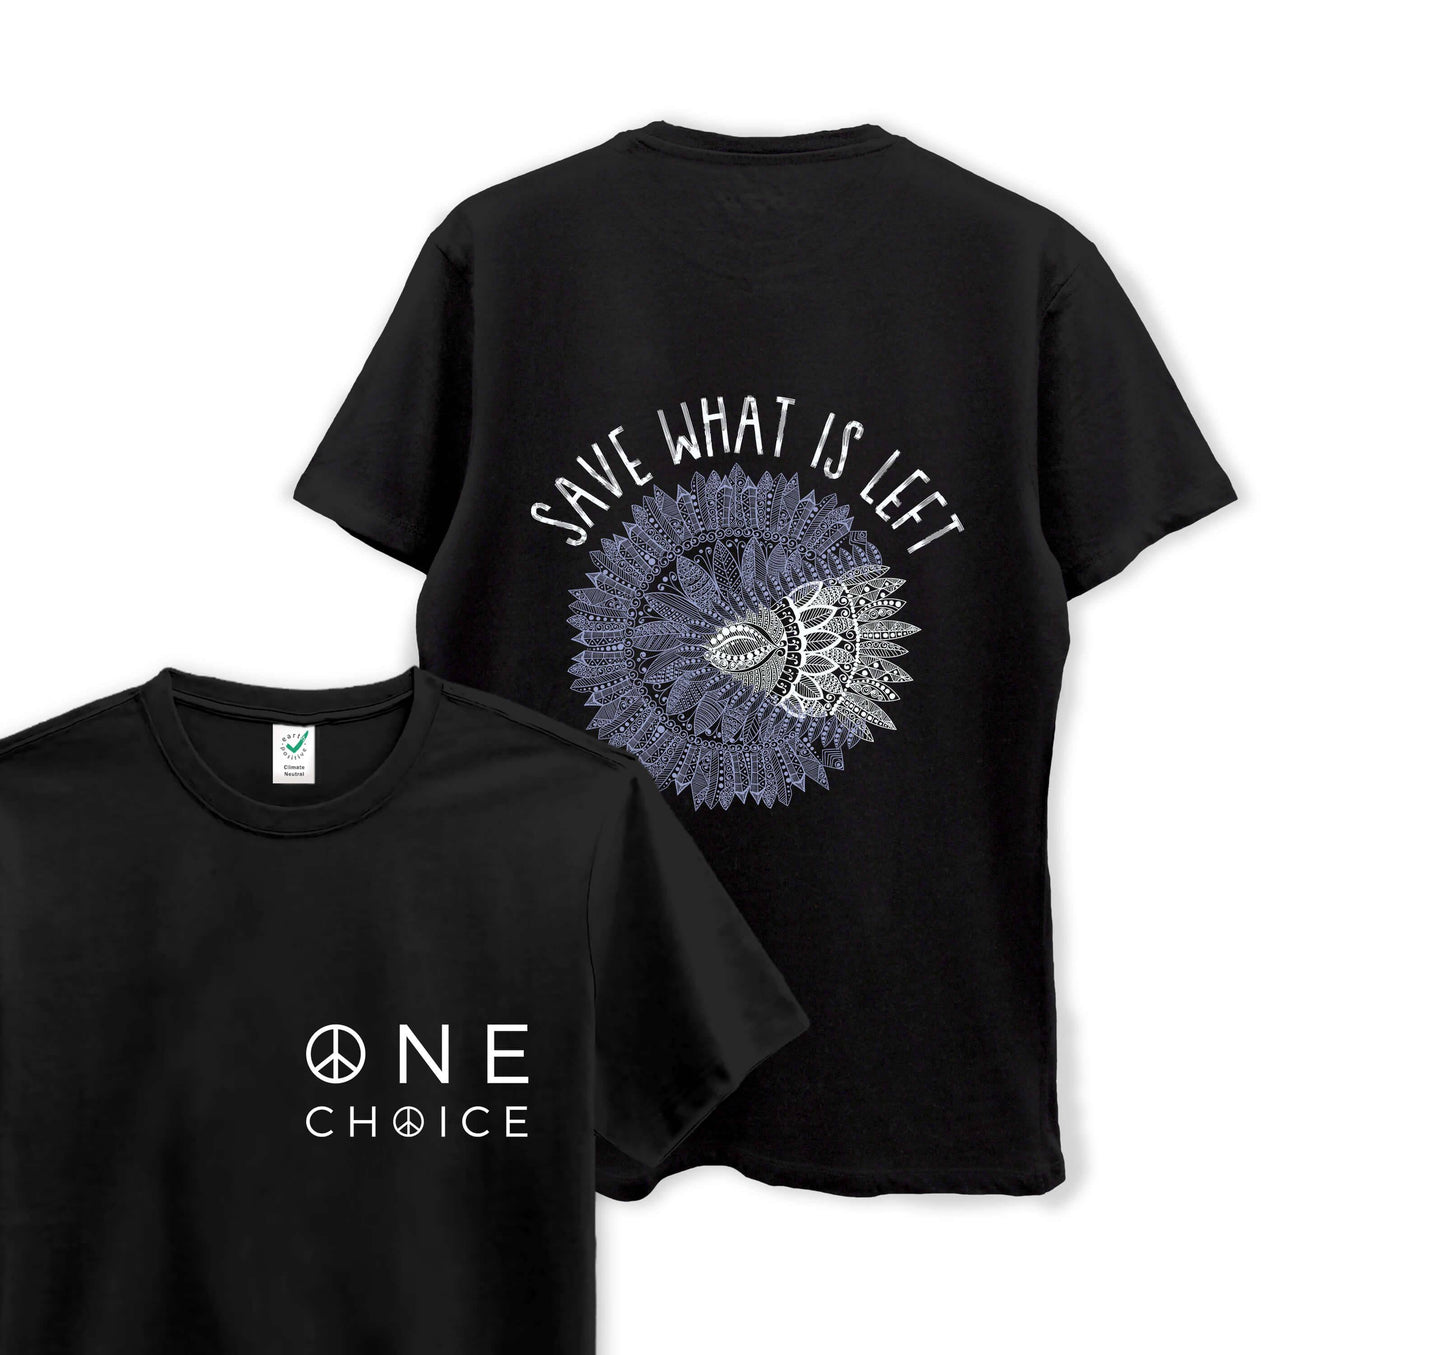 Save What Is Left - Organic Cotton Tee - One Choice Apparel